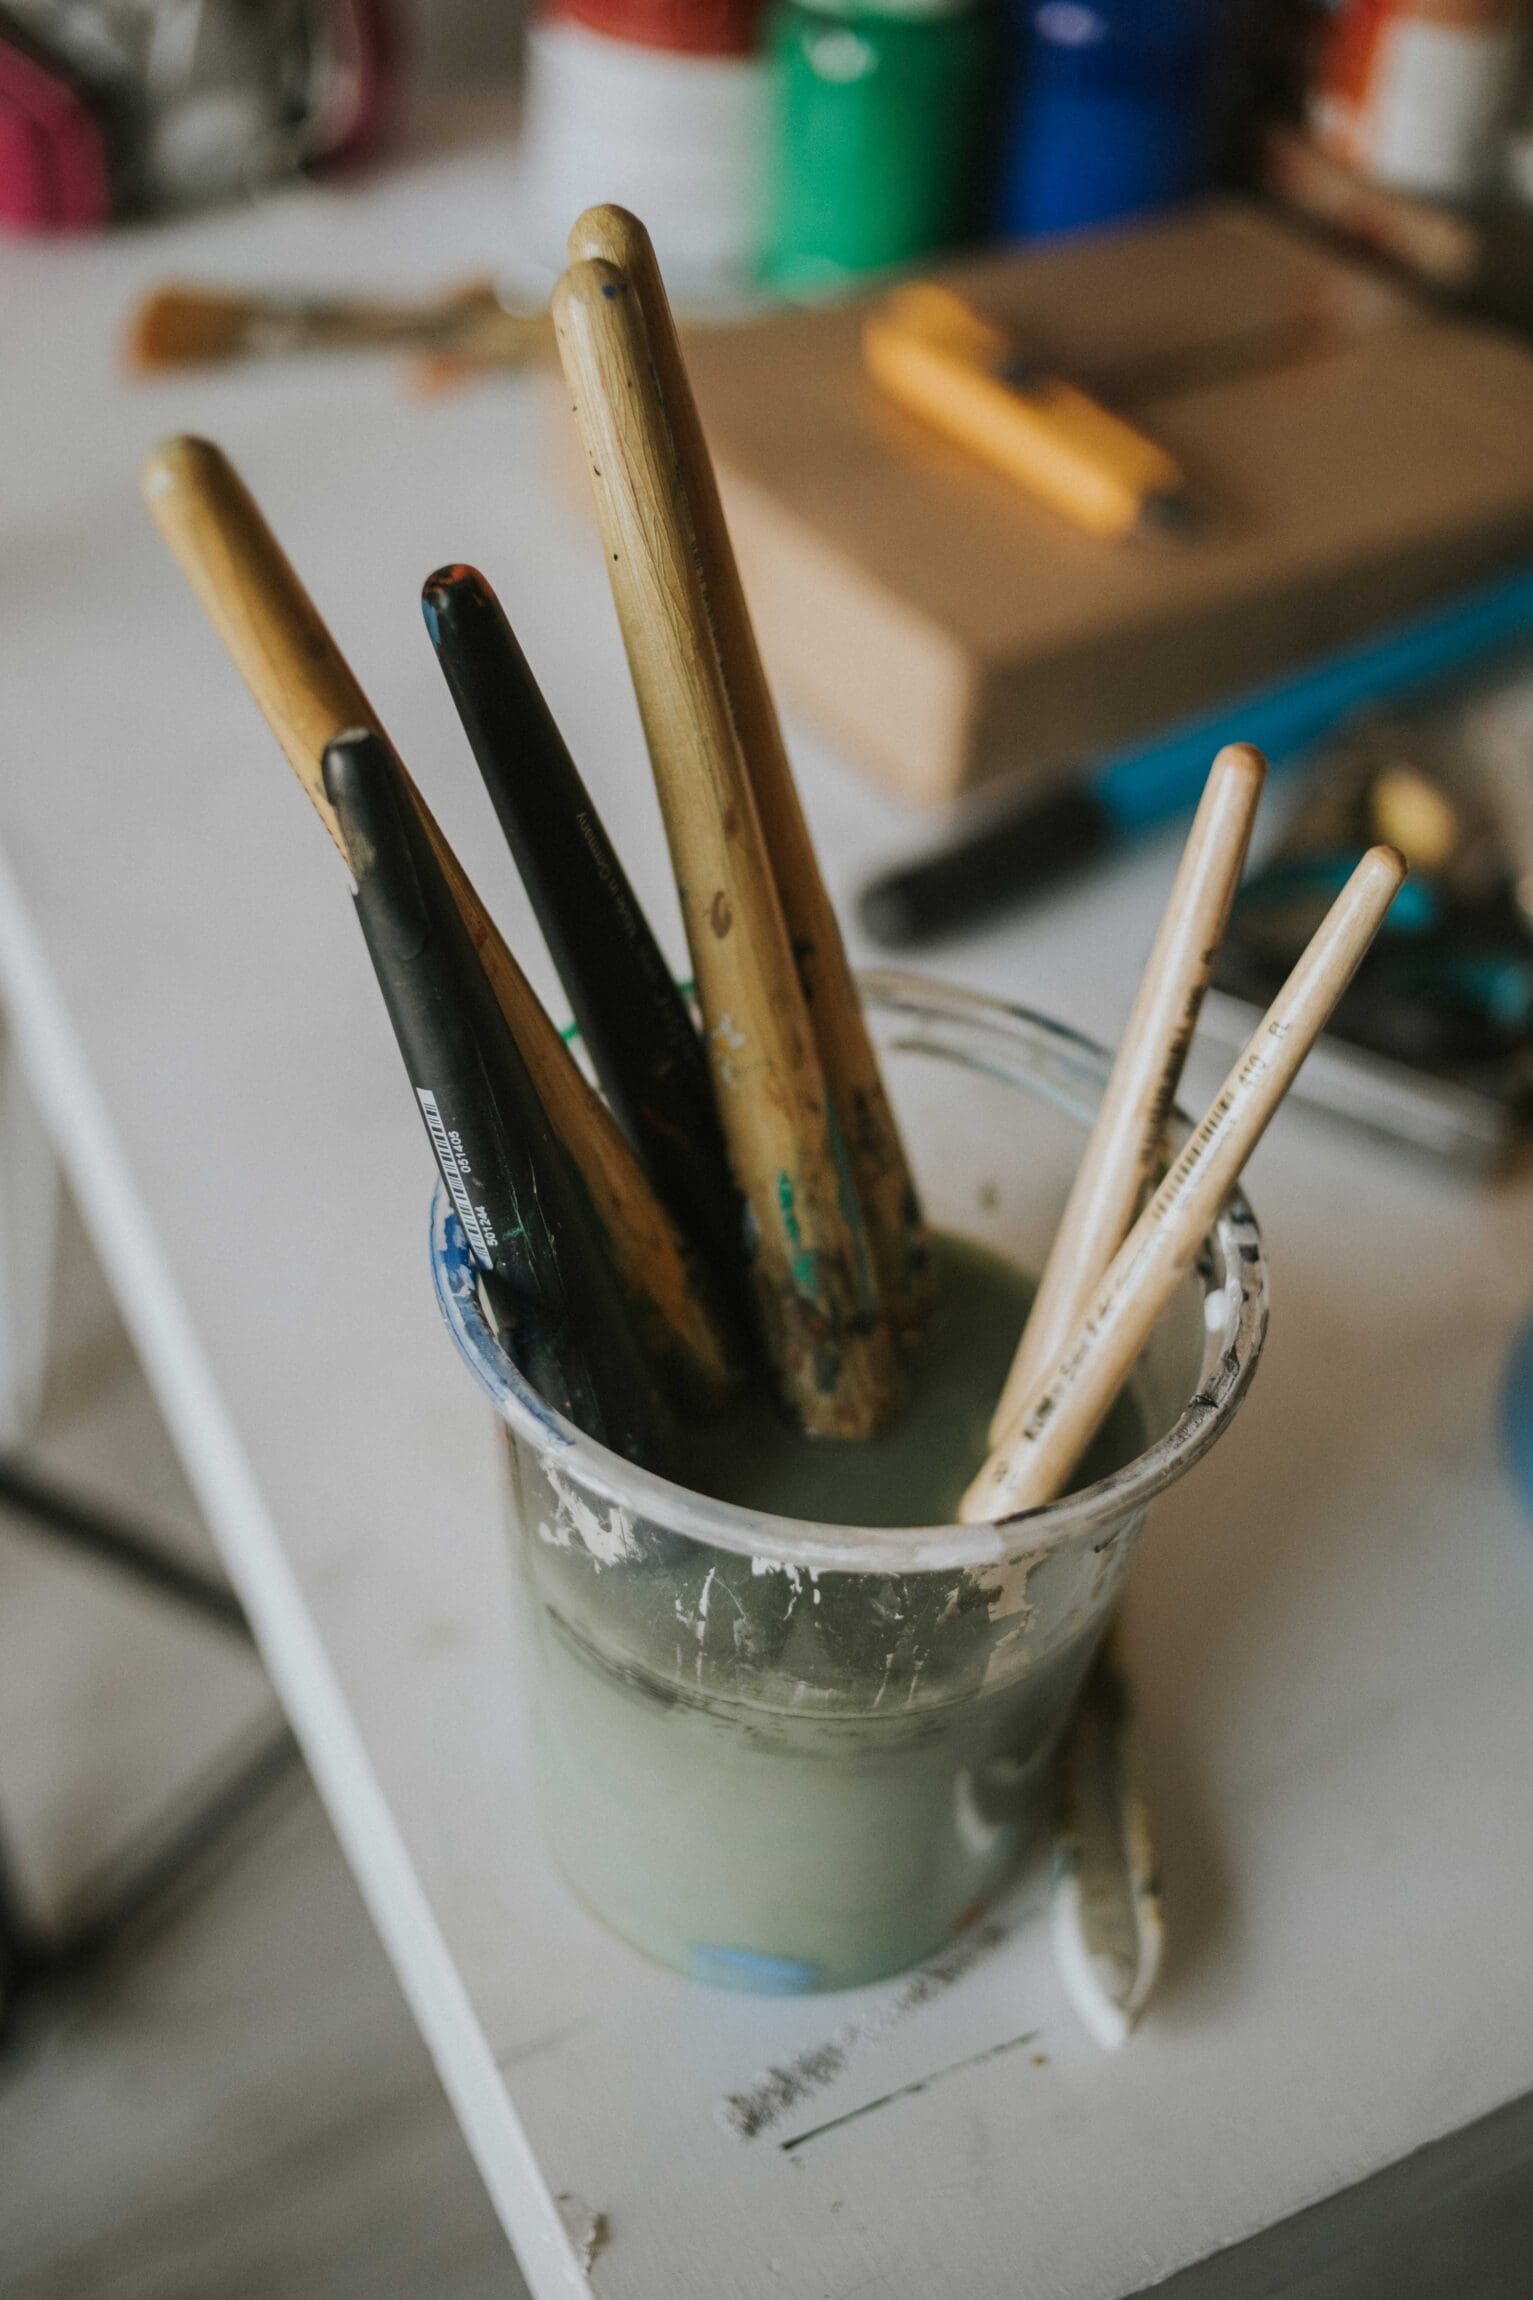 Used brushes in a cup of water at artist Luisa Salas's home studio